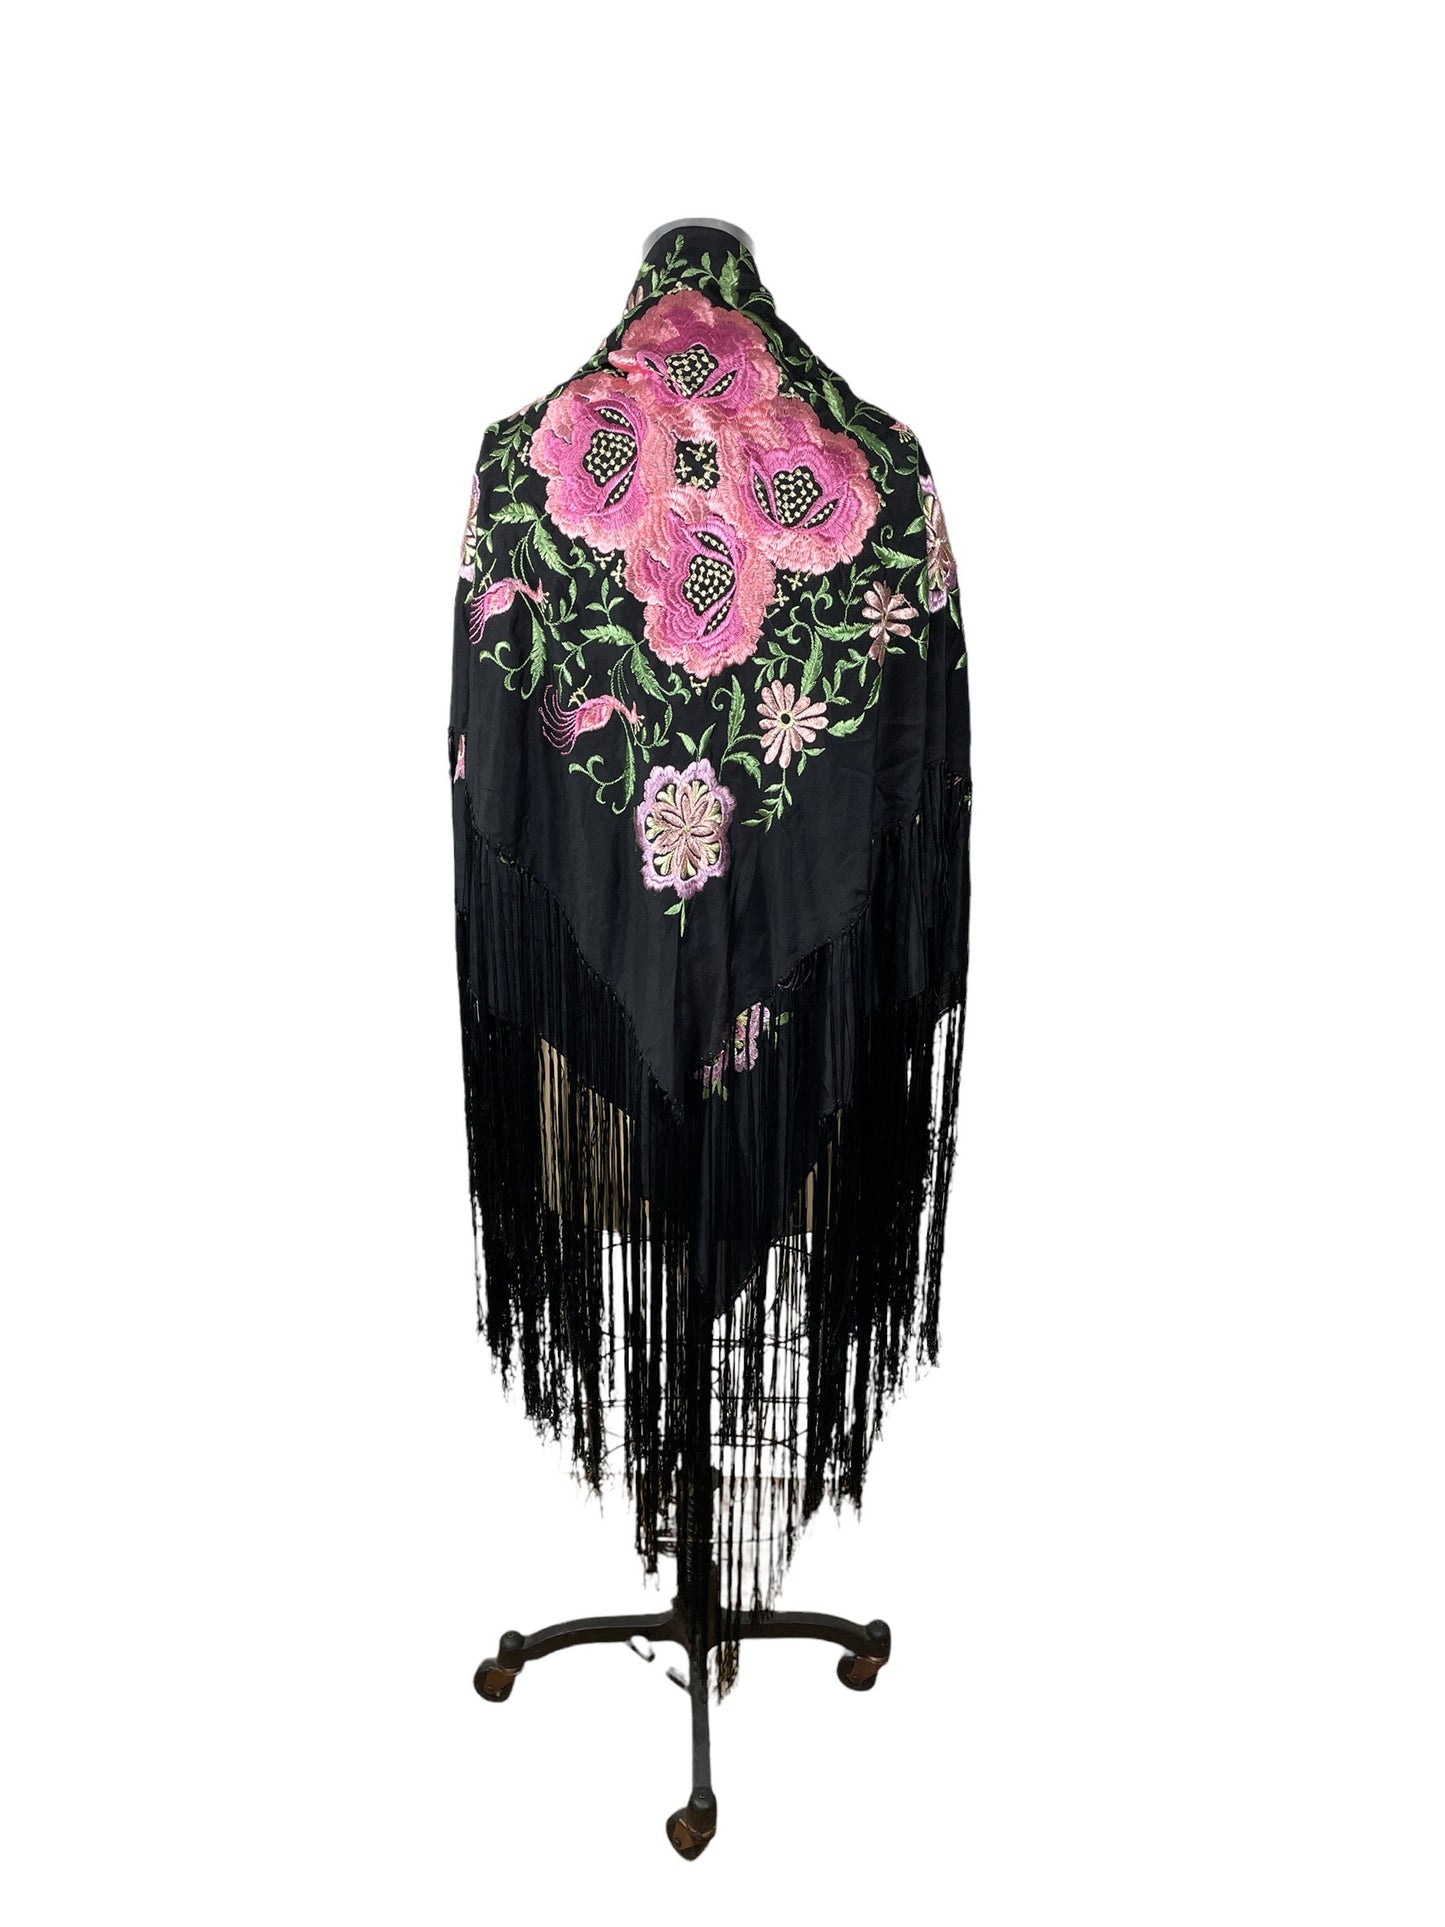 1920s 30s silk piano shawl in black and pink with long fringe 51" x 52"